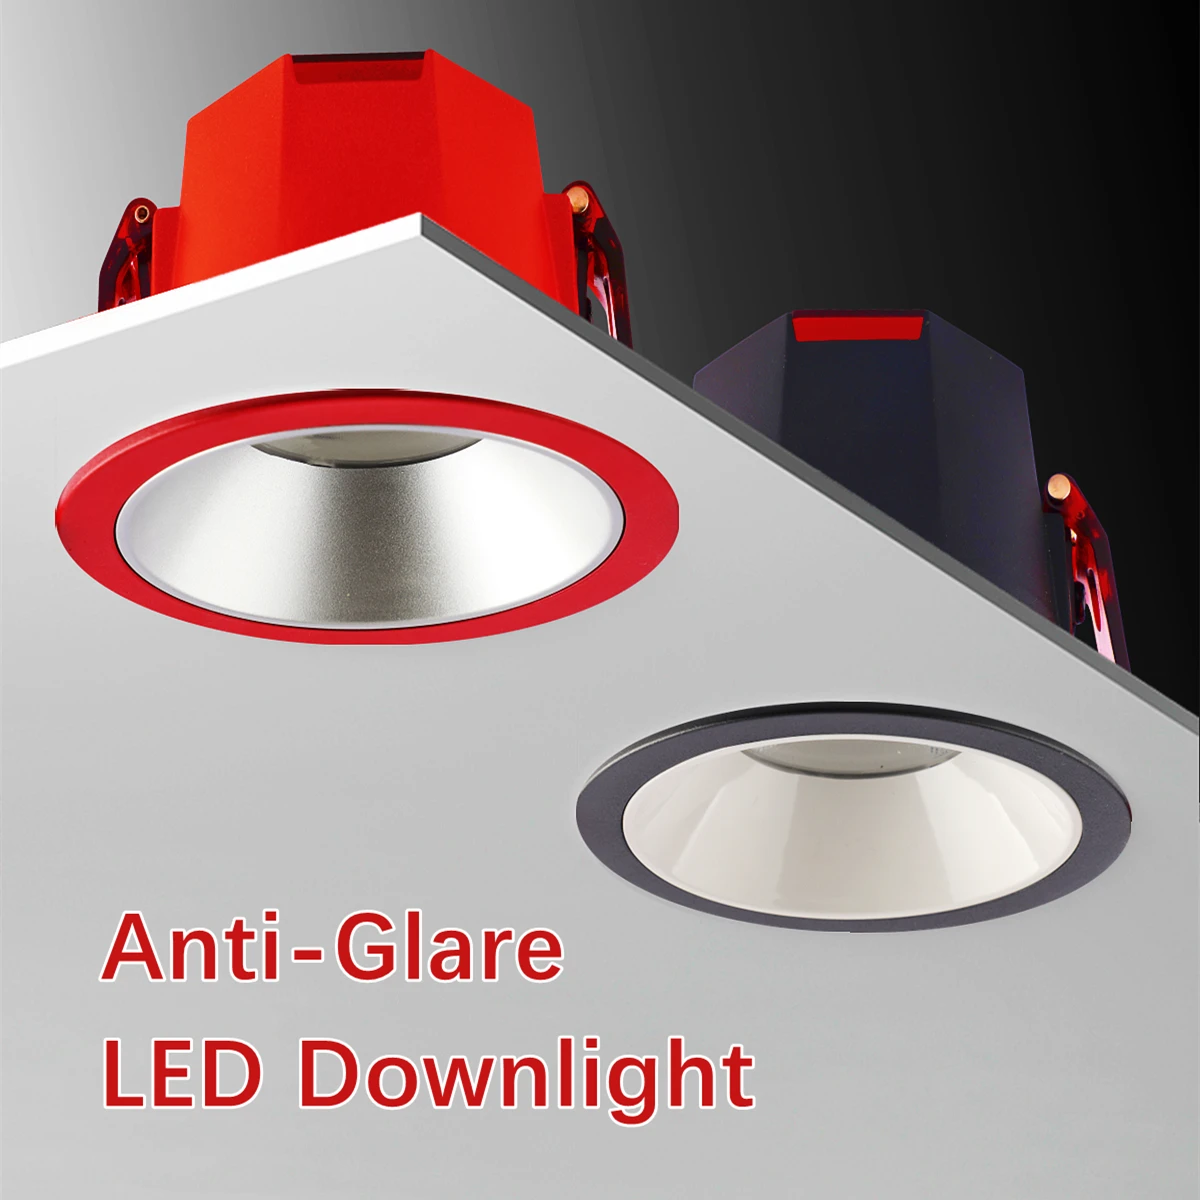 

Recessed LED Downlight Anti-Glare Gold Red Ceiling Light Bedroom Kitchen Indoor 7W 10W 15W 20W Dimmable Spotlight